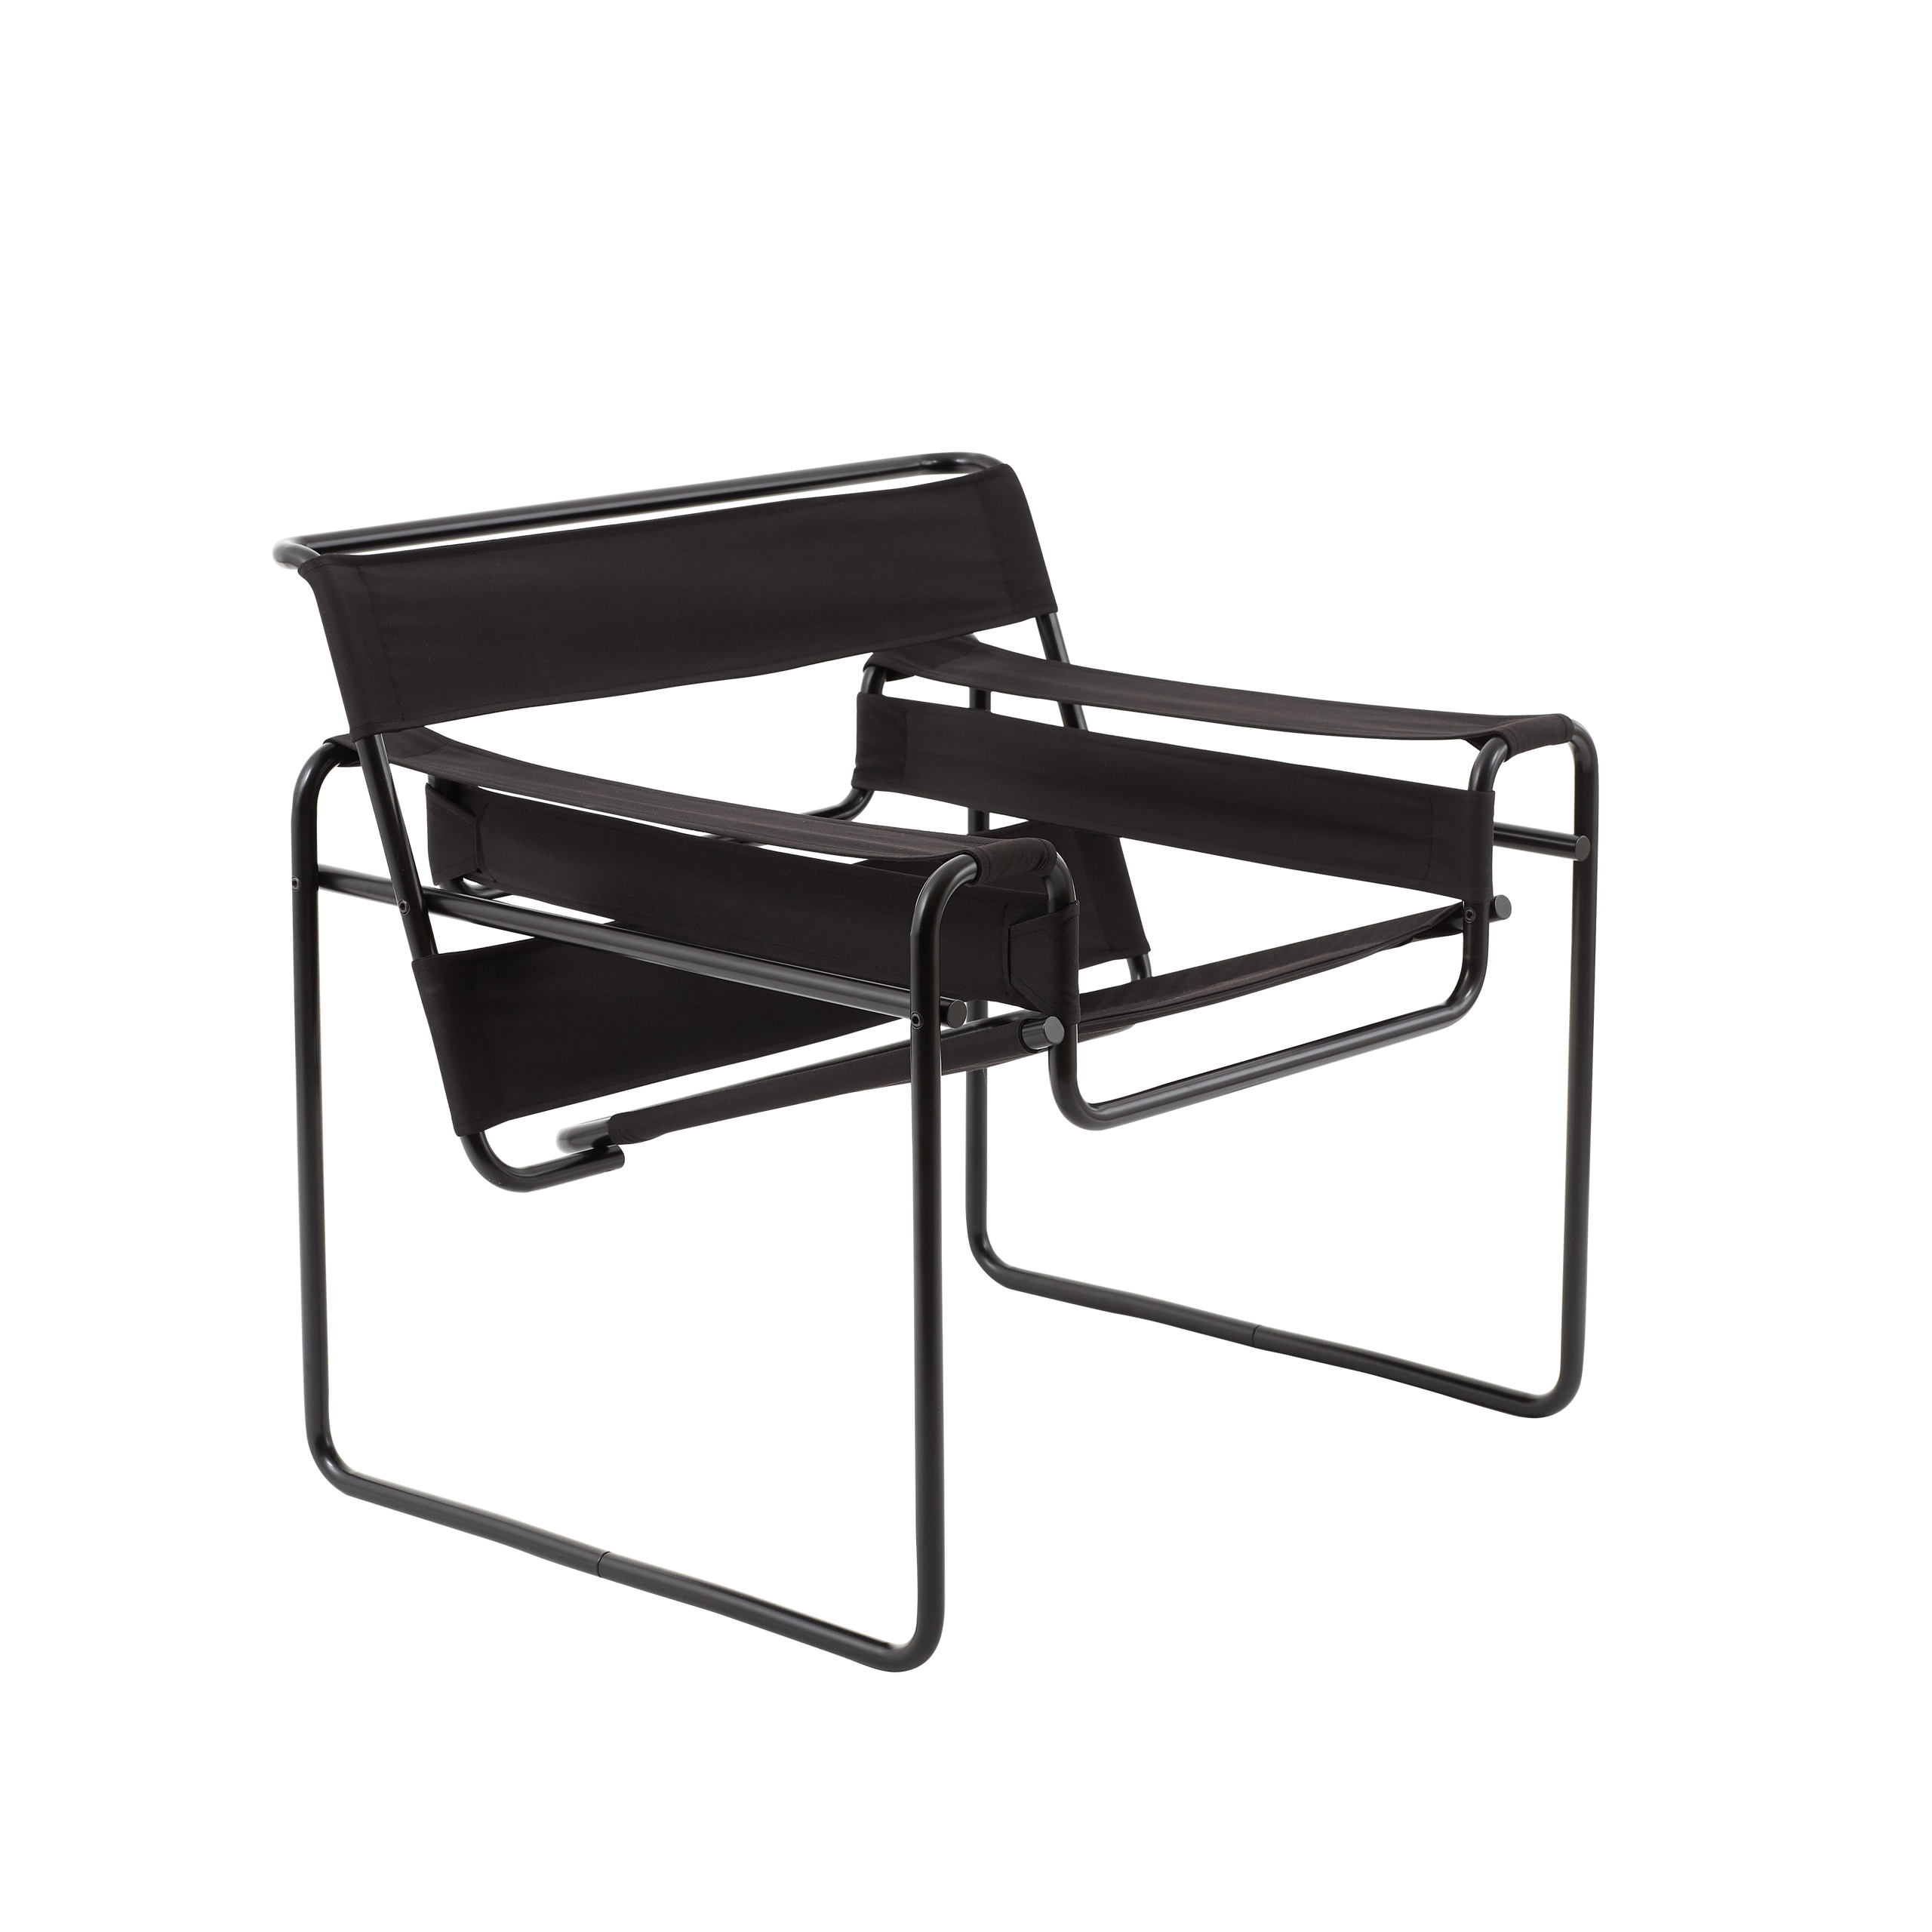 Wassily B3 chair by Marcel Breuer